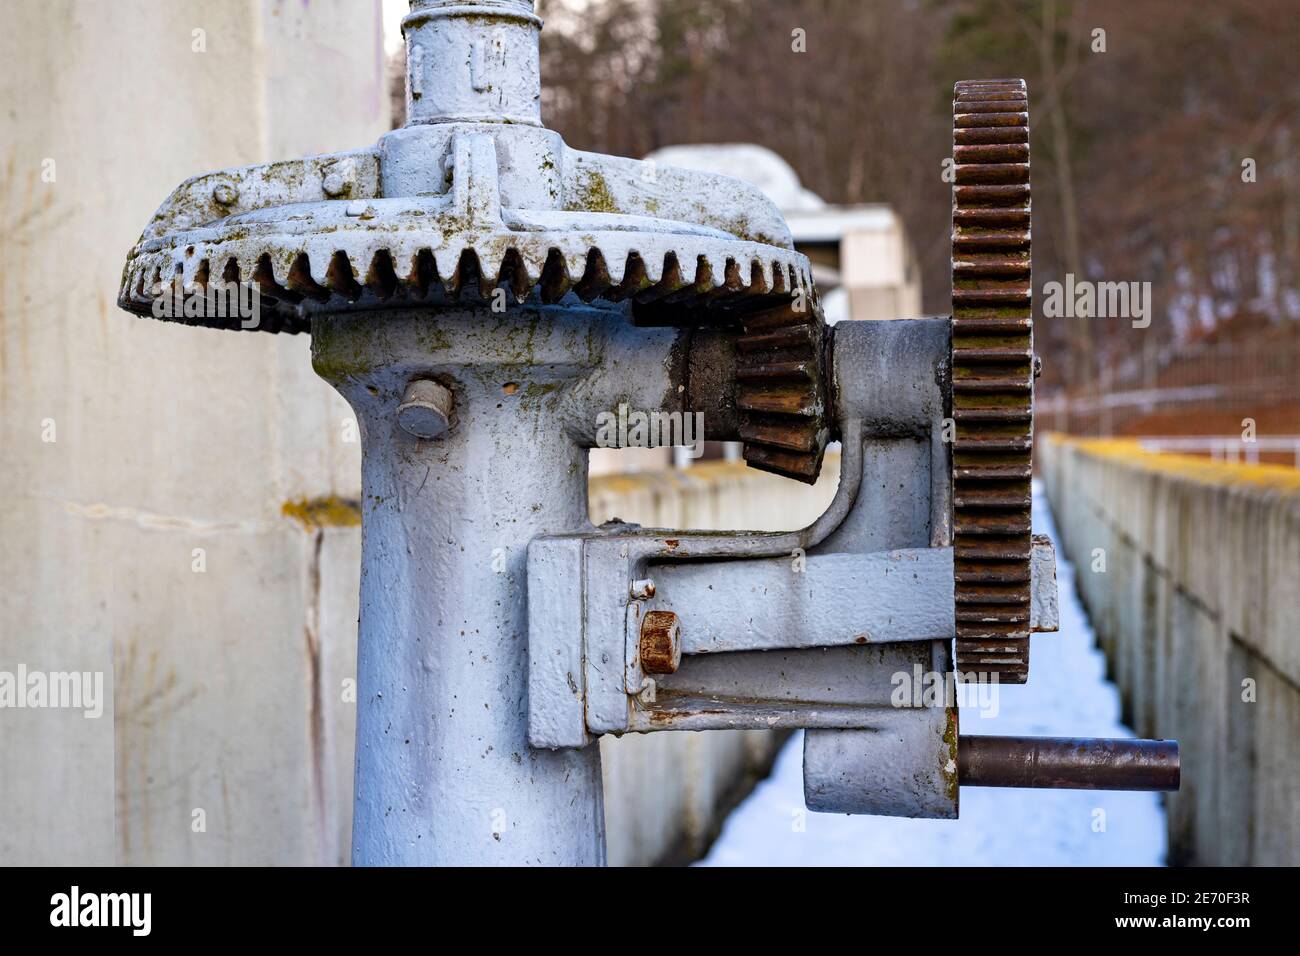 Large gears in an old gearbox. Steel structure to transfer rotational energy. Light background. Stock Photo